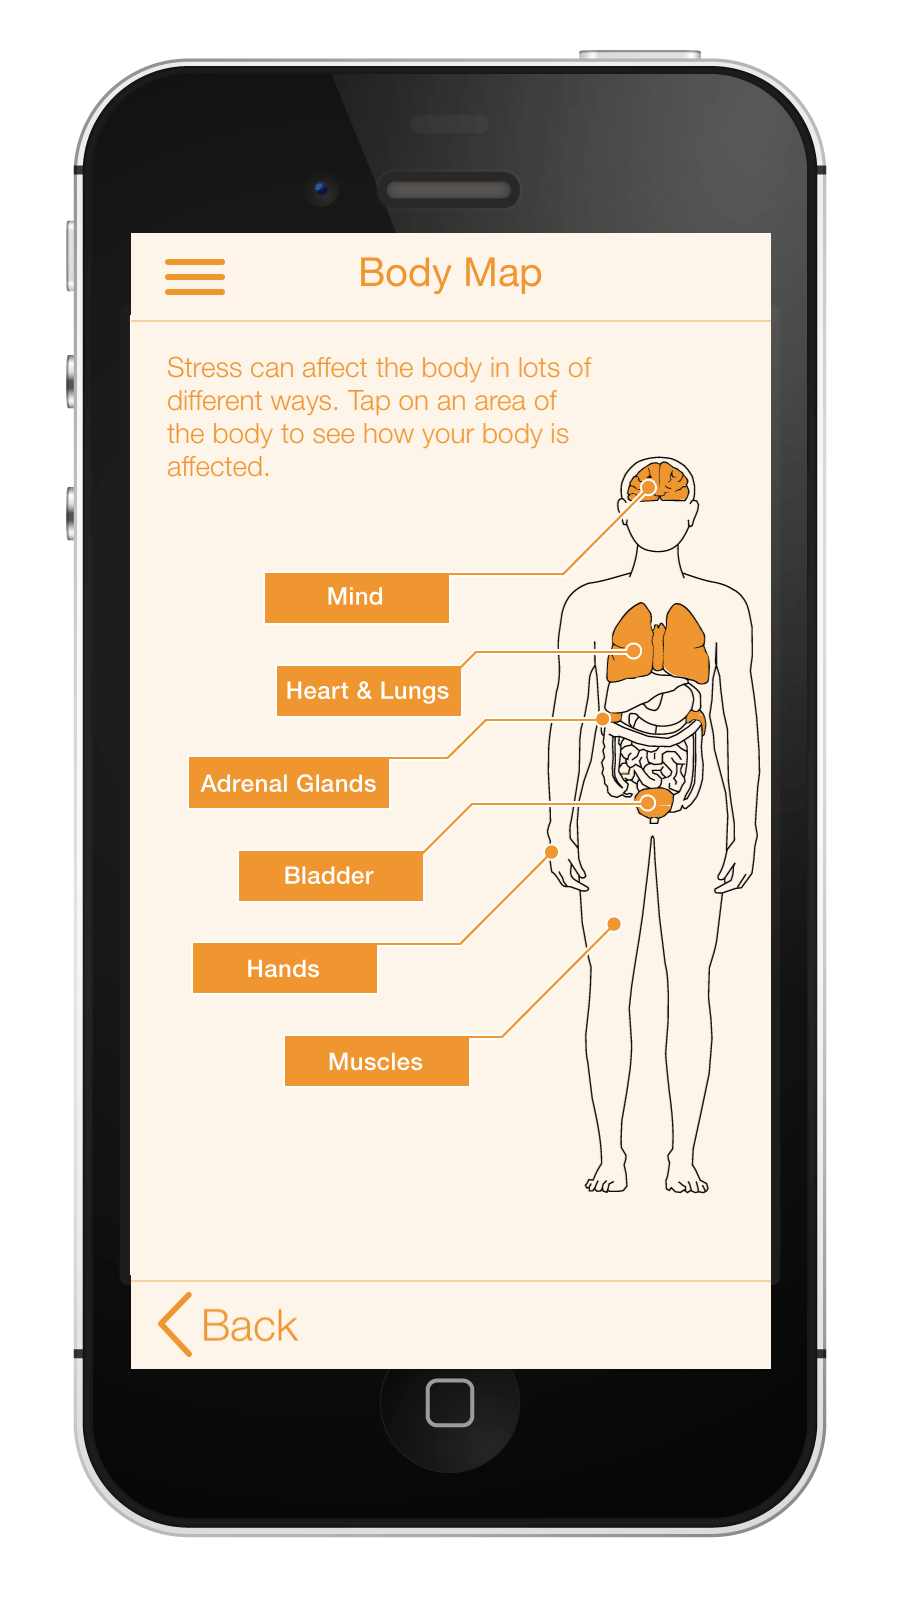 Body map within phone